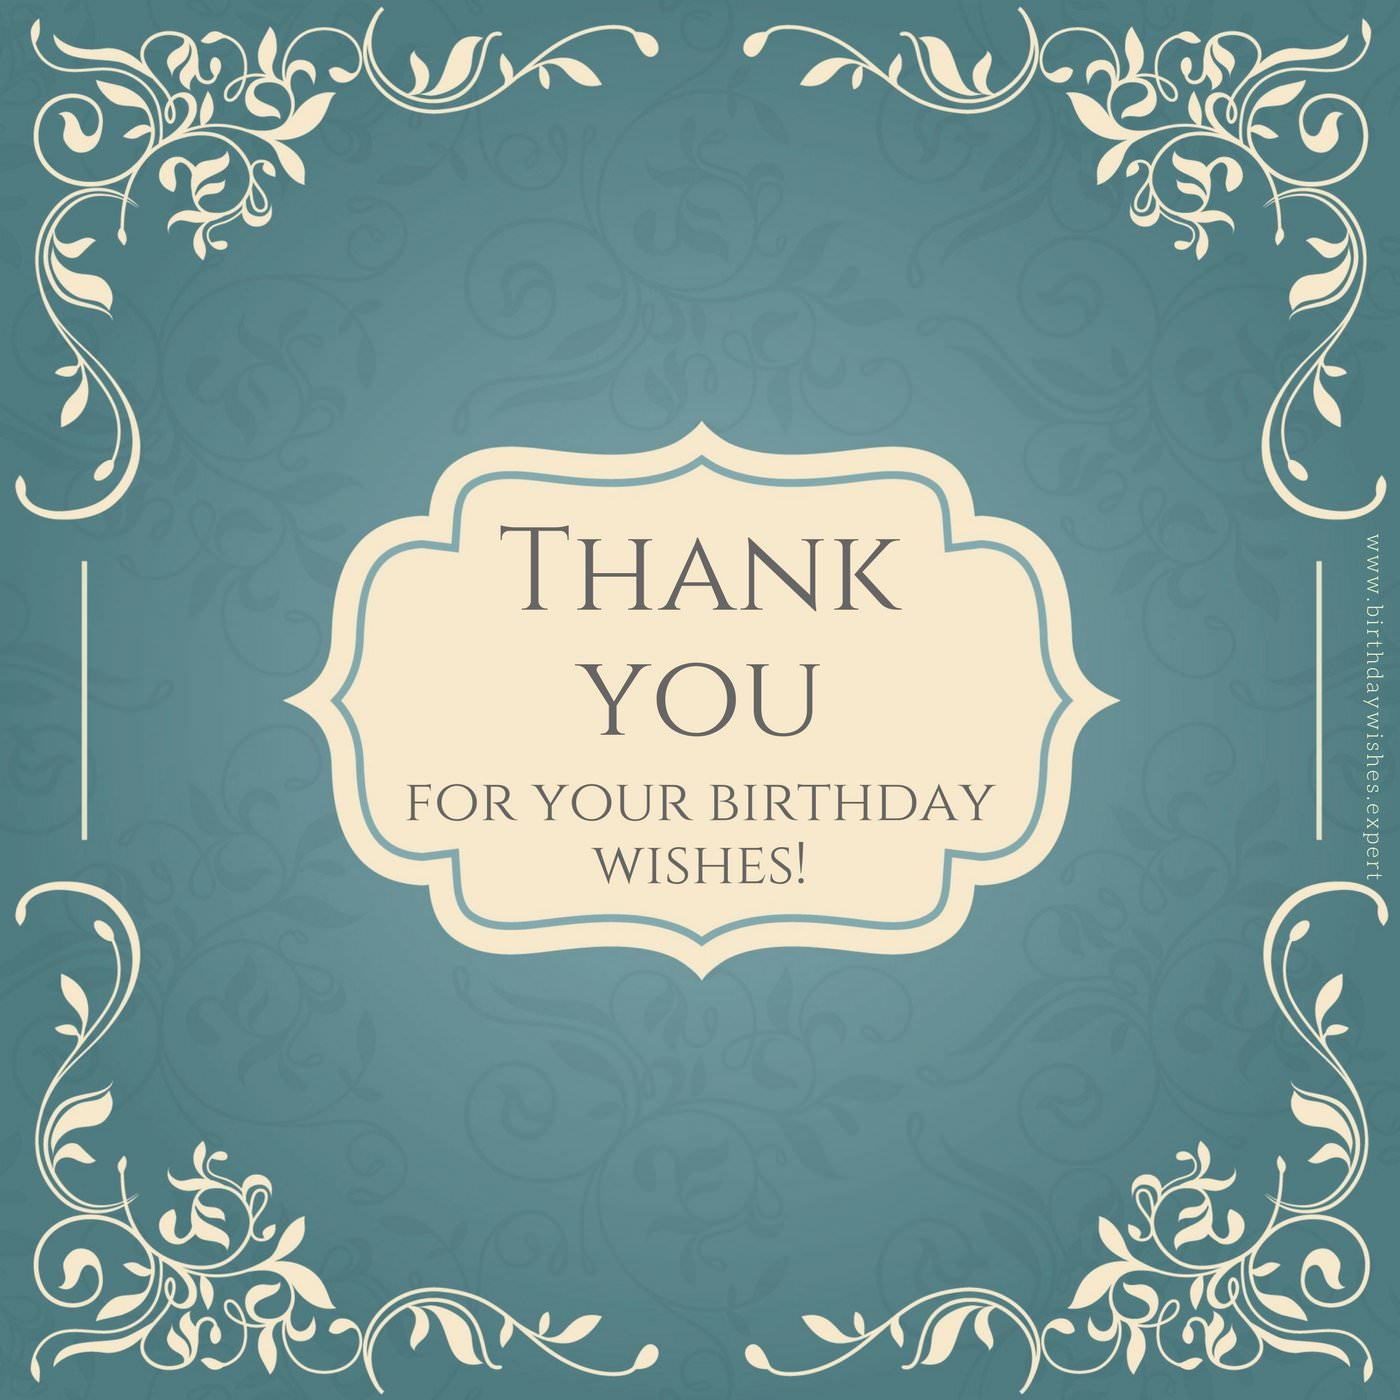 Birthday Wishes Thank You Note
 Thank You Notes for Your Birthday Wishes